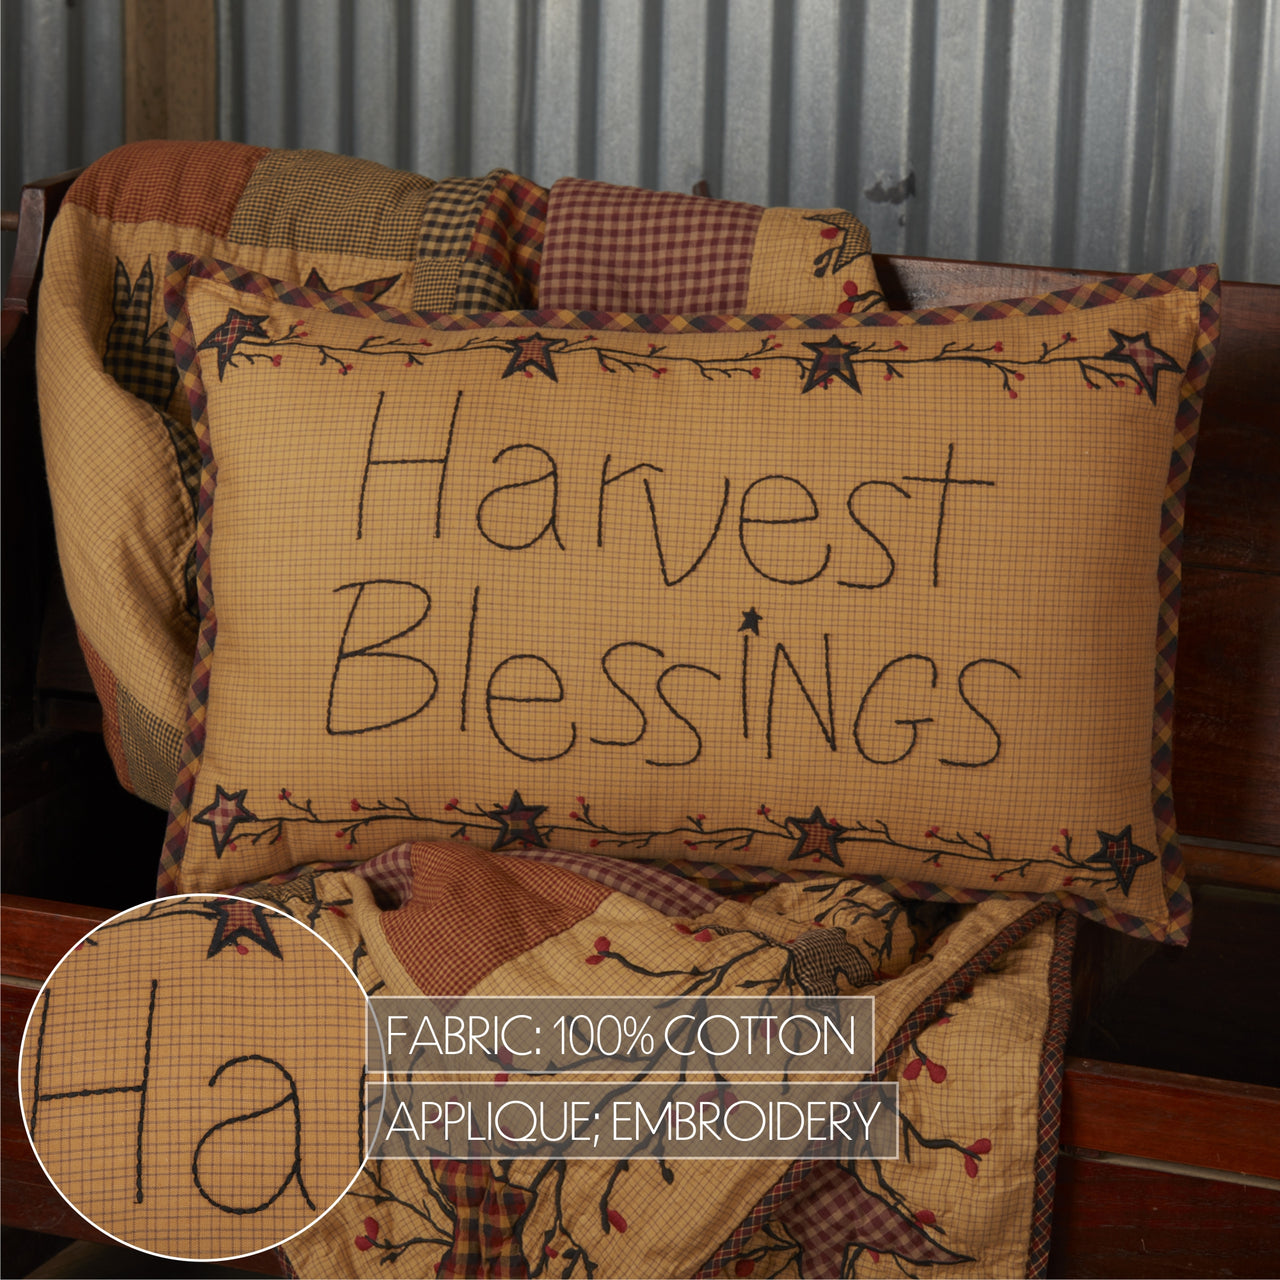 Heritage Farms Harvest Blessings Pillow 14x22 VHC Brands